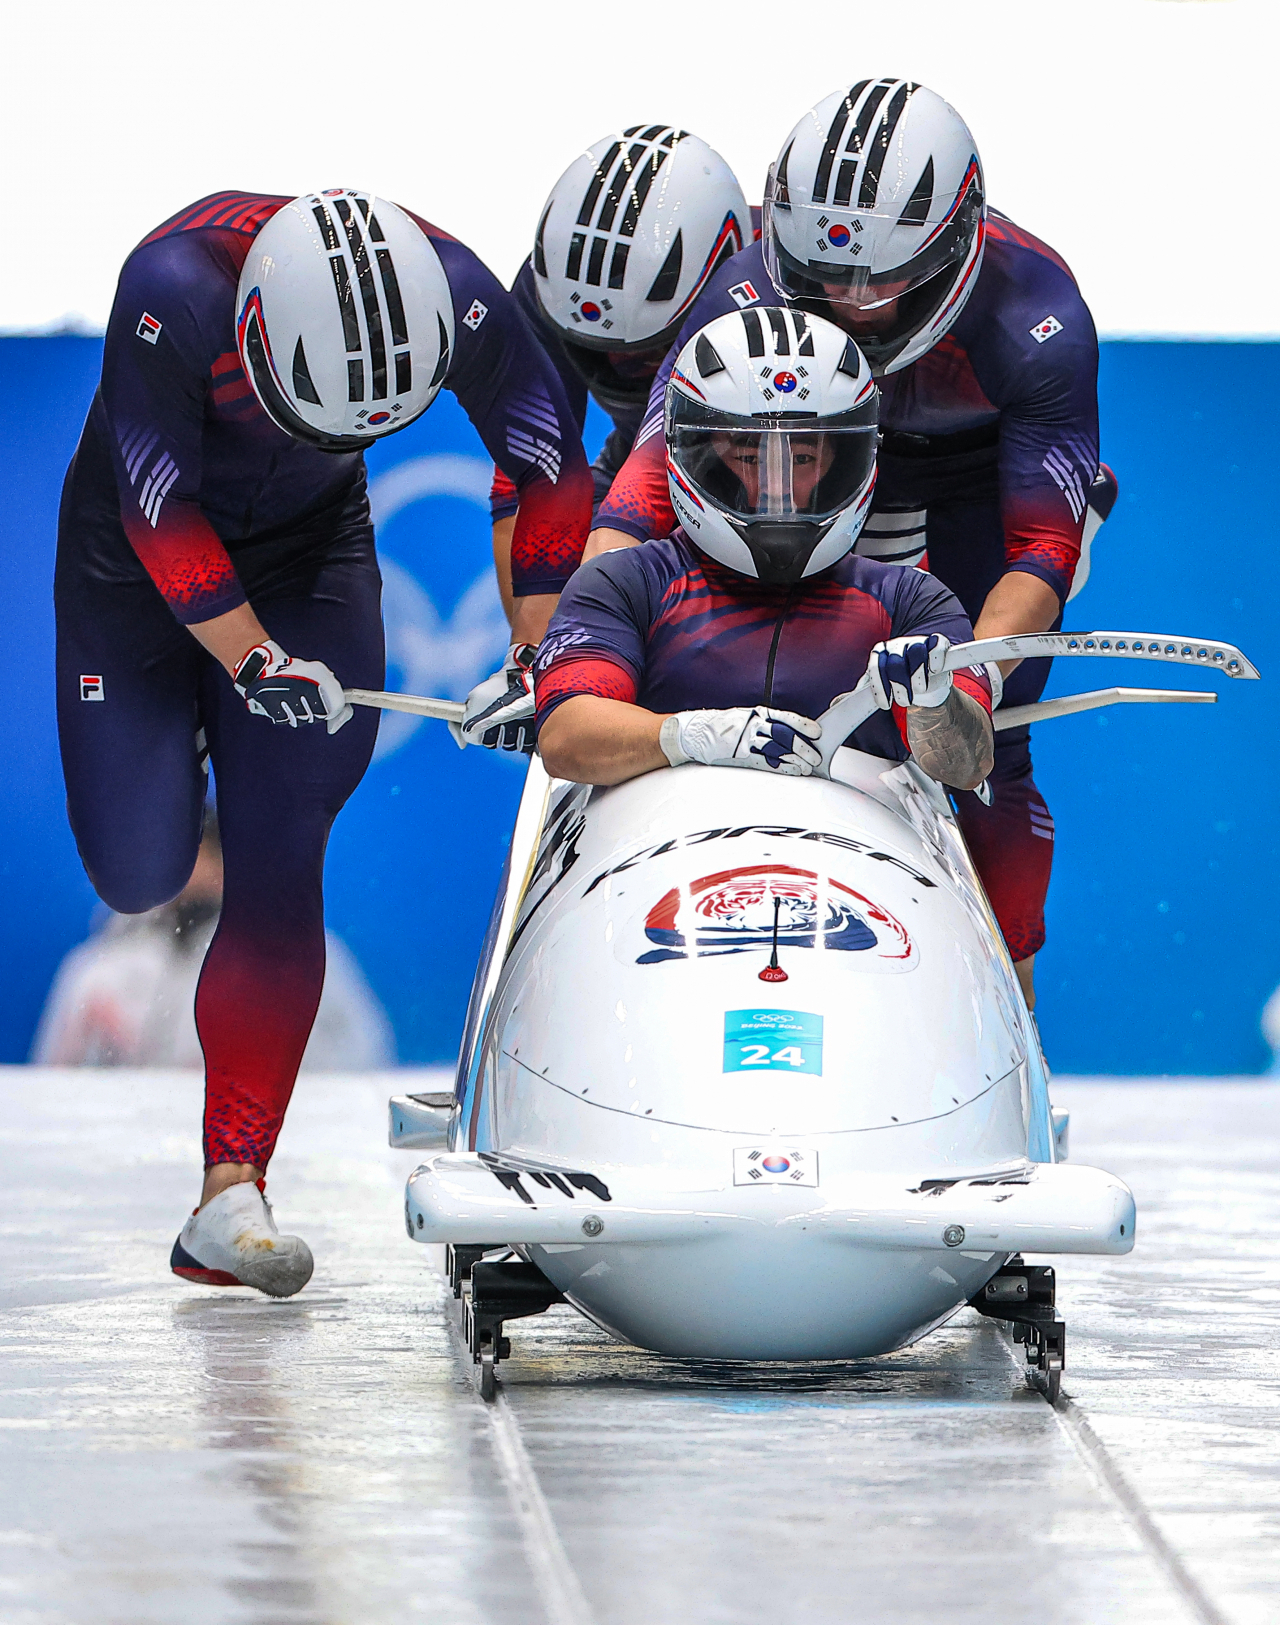 In this Associated Press photo, a South Korean bobsleigh team, piloted by Won Yun-jong (front), comes to the finish area after the third run of the four-man competition at the Beijing Winter Olympics at Yanqing National Sliding Centre in Yanqing District, northwestern Beijing, on Sunday. (Yonhap)